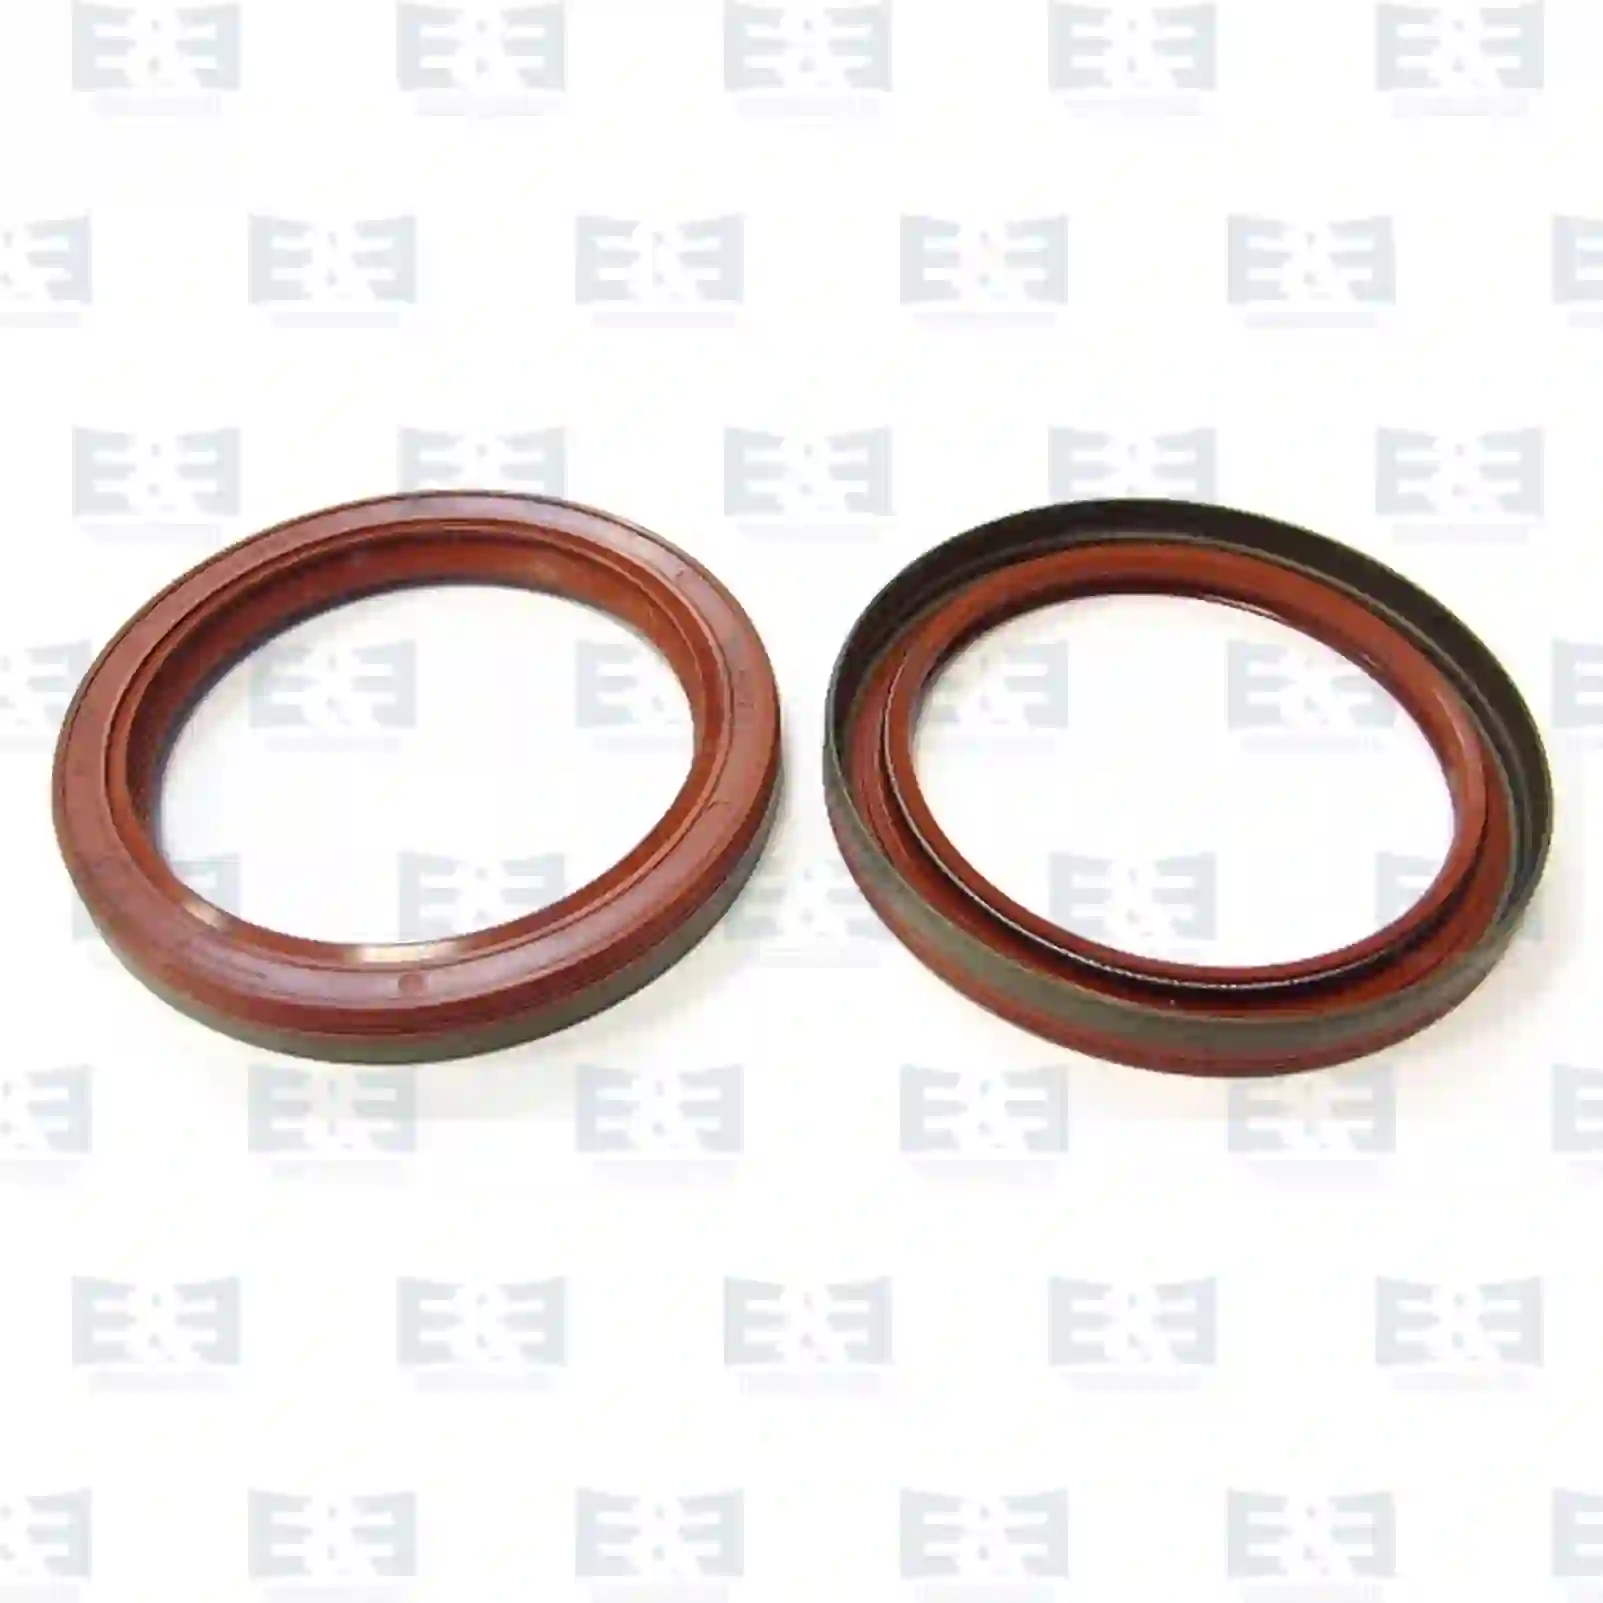  Cylinder Head Oil seal, EE No 2E2209864 ,  oem no:98454041, 080729, 1615787, 07301198, 40003650, 40003657, 40100070, 40100331, 40100334, 5000815434, 98427998, 98428409, 98454041, 99433965, 9111049, 40100331, 42531636, 42562103, 98427998, 98454039, 98454041, 40003650, 40100330, 98428409, 98454041, 06562790359, 4403049, 080729, 5000815434, 5001001254, 5001853924, 7701035740, 7701046541, 7701461930 E&E Truck Spare Parts | Truck Spare Parts, Auotomotive Spare Parts